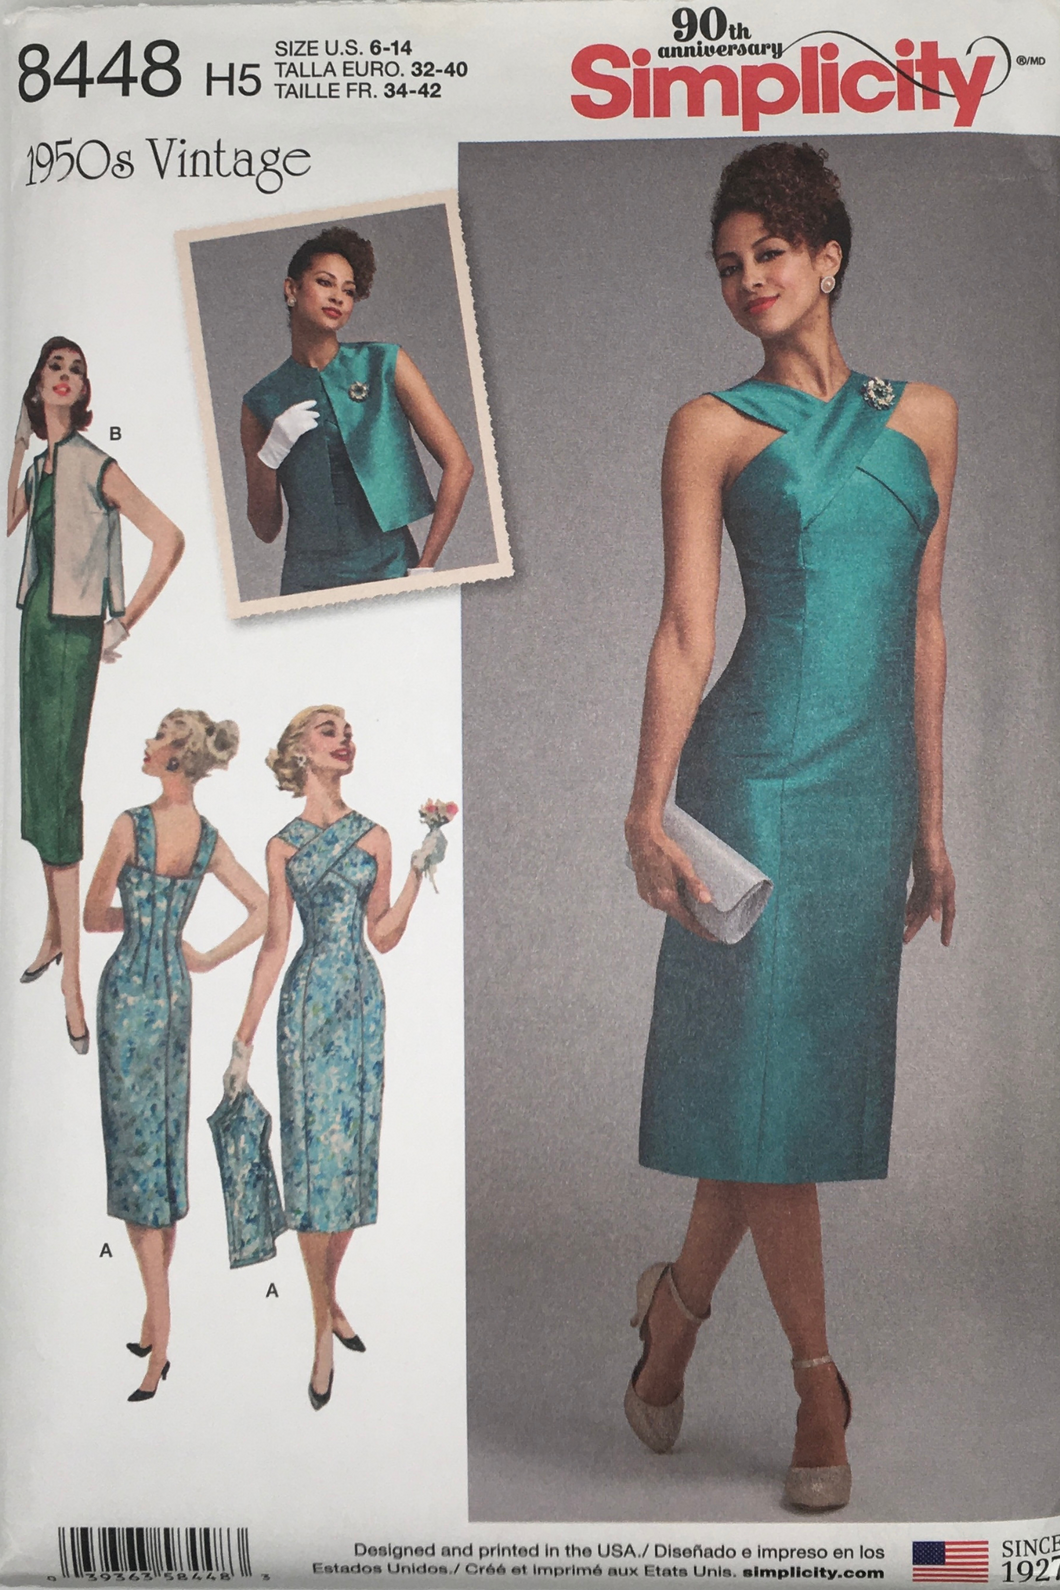 1950’s Reproduction Sewing Pattern: Simplicity 8448